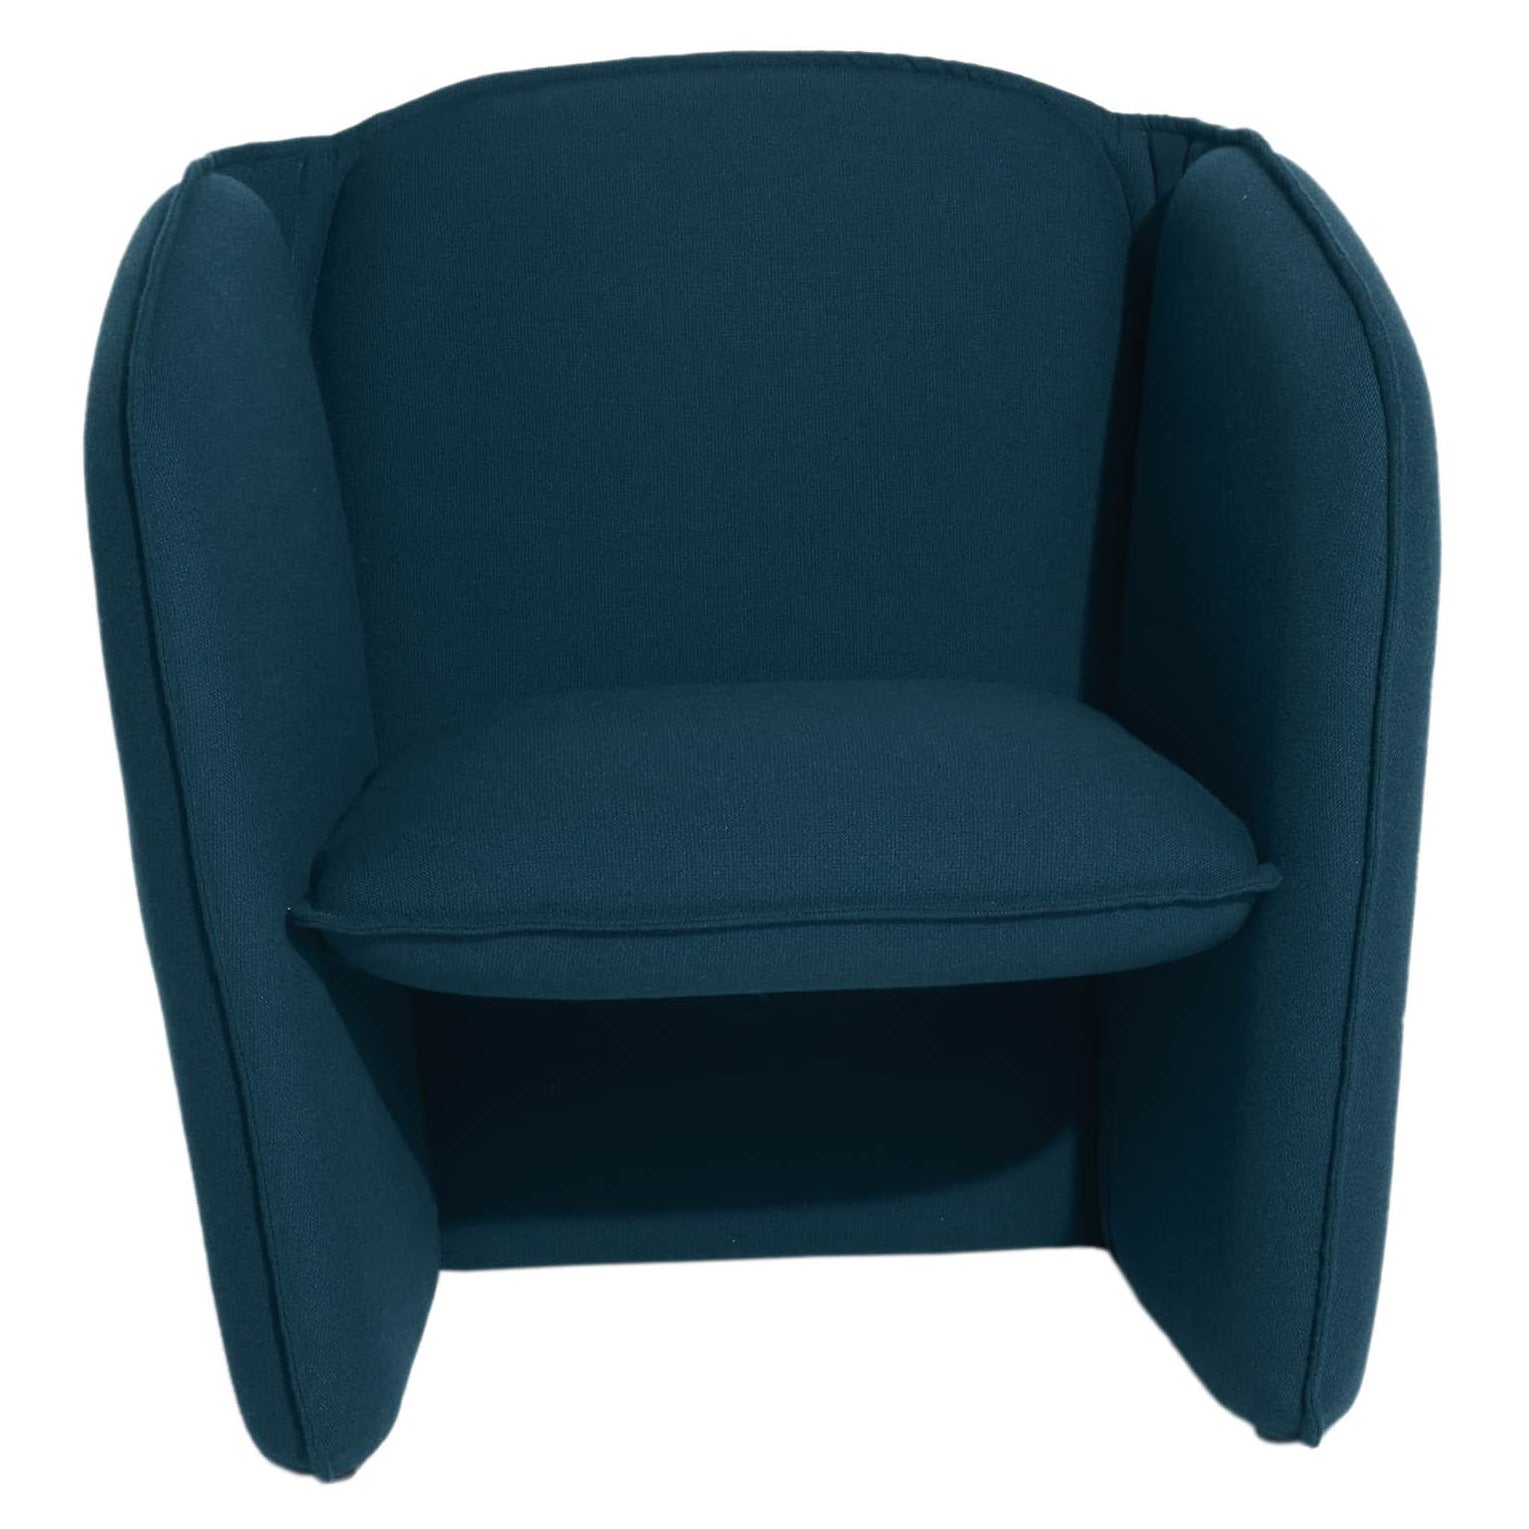 Petite Friture Lily Armchair in Navy Blue by Färg and Blanche, 2022 For  Sale at 1stDibs